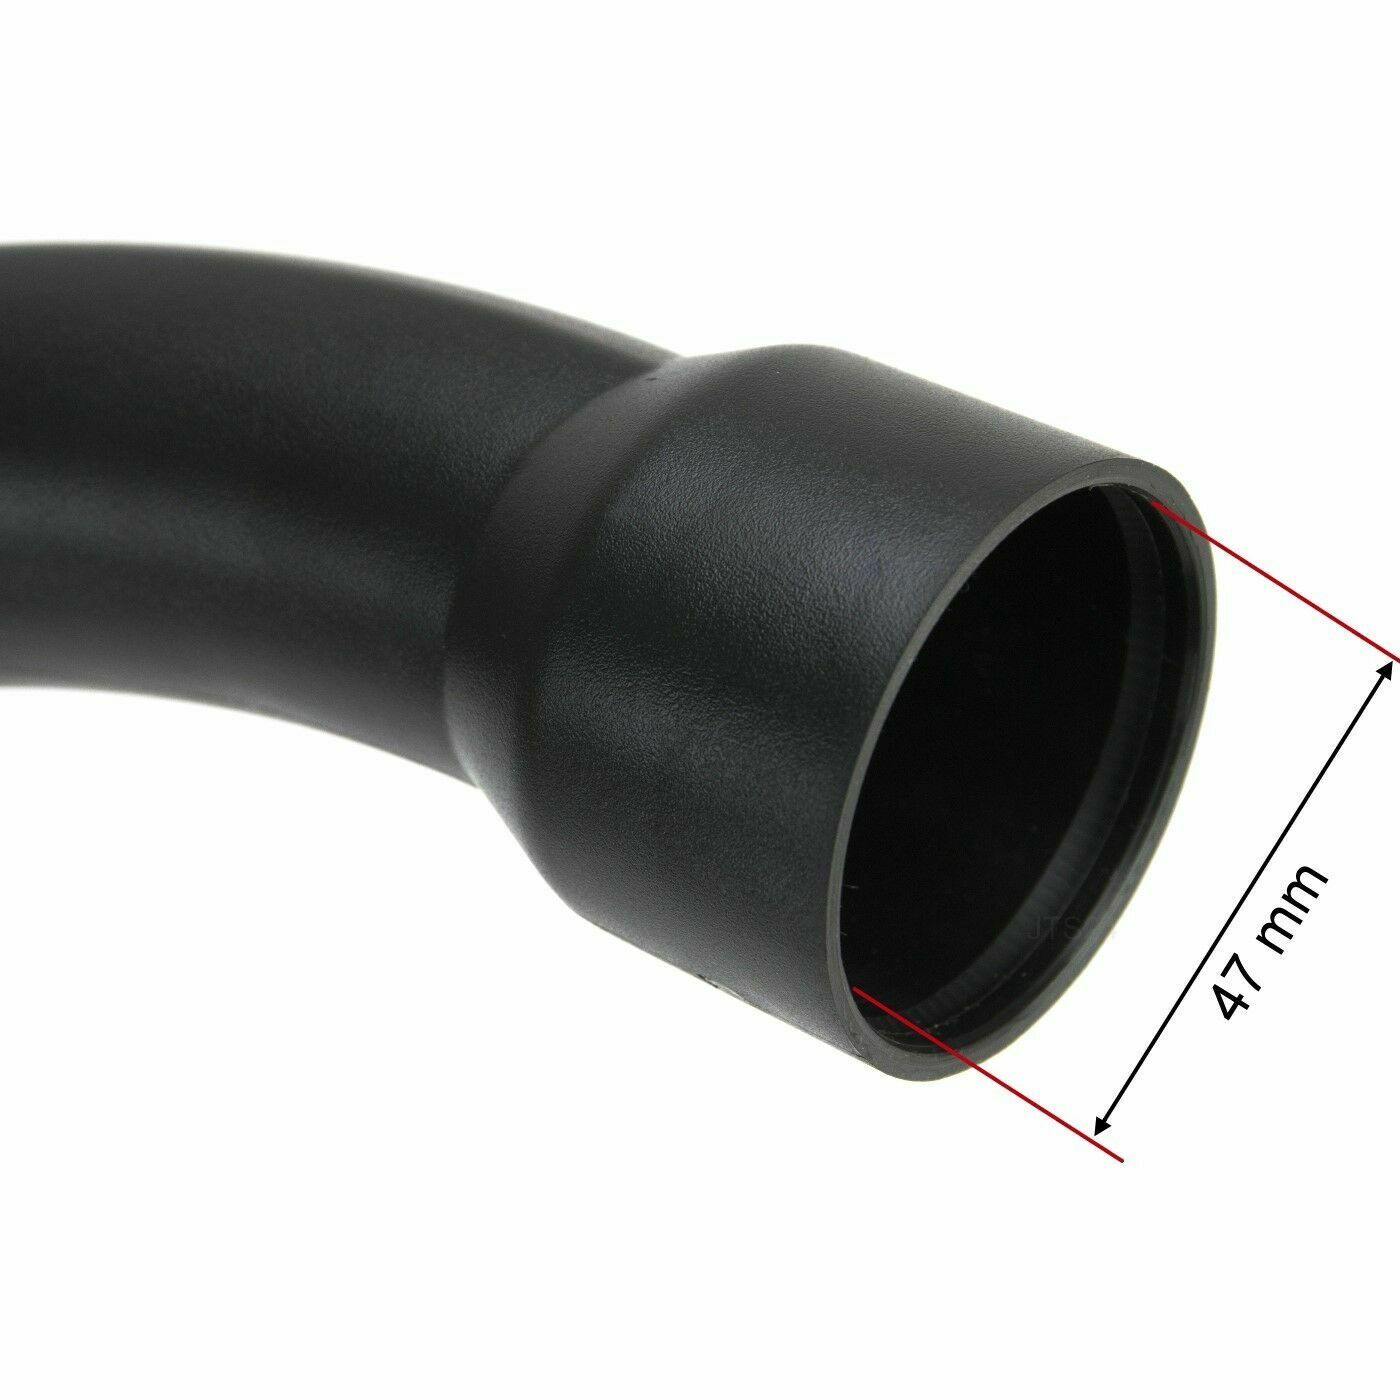 Hose Bent End Curved Handle For Miele S 5000 S 5211 S 5311 S548 S548 S500 S 500 Sparesbarn